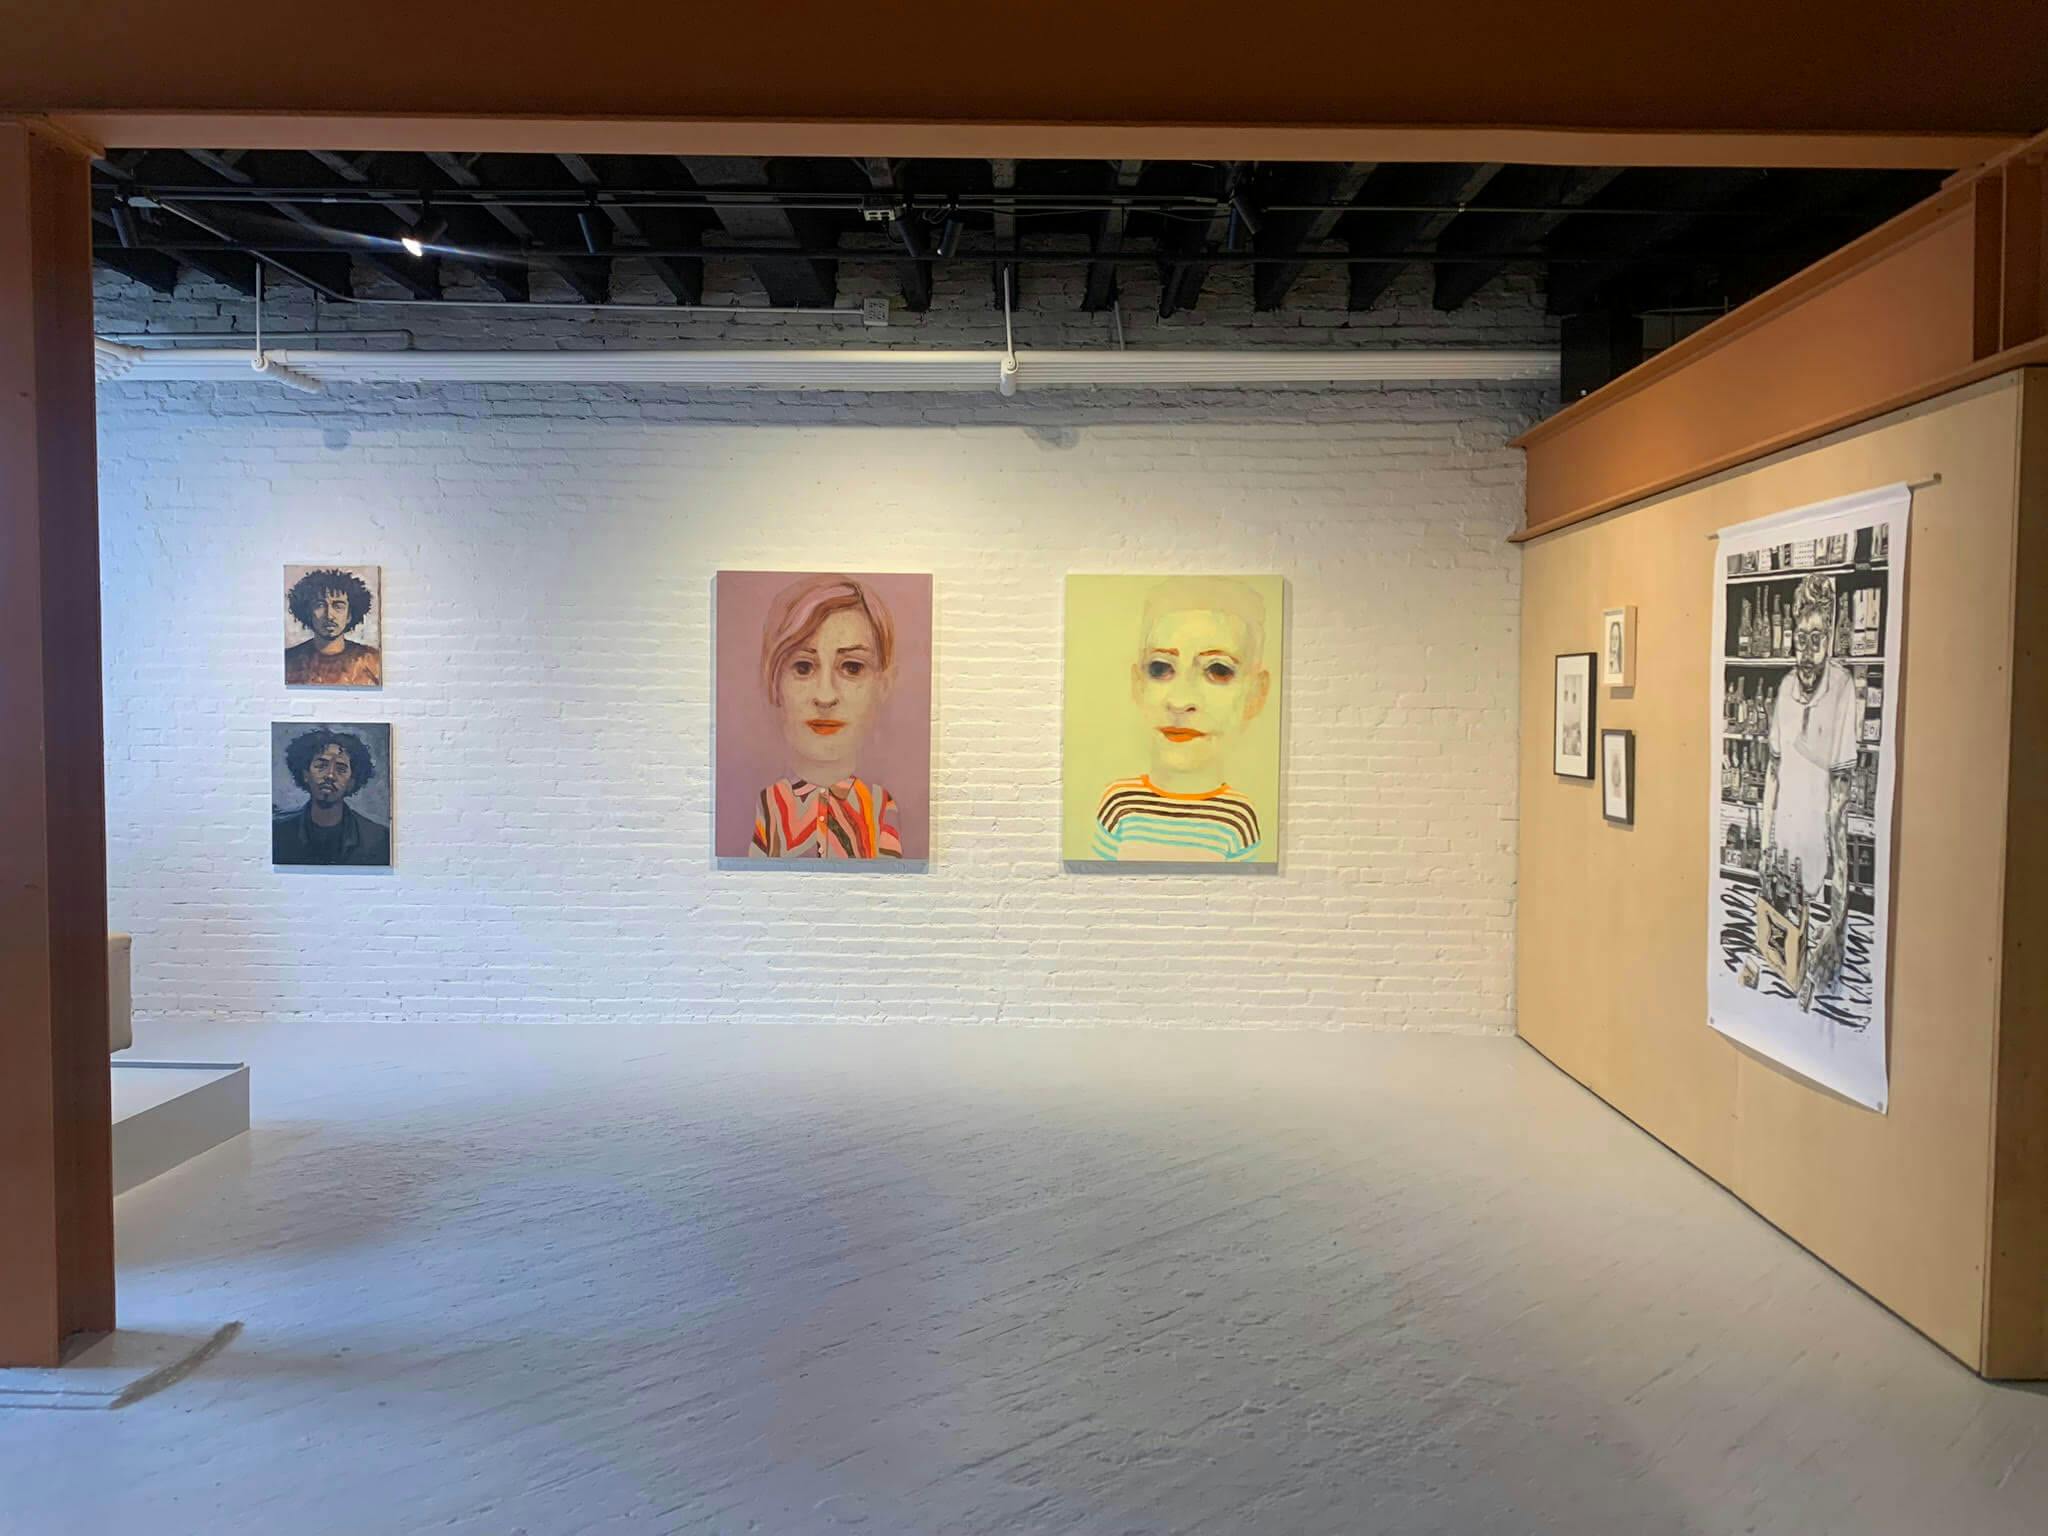 The images of faces are displayed on canvases, set against a white brick wall at Gallery VERY.